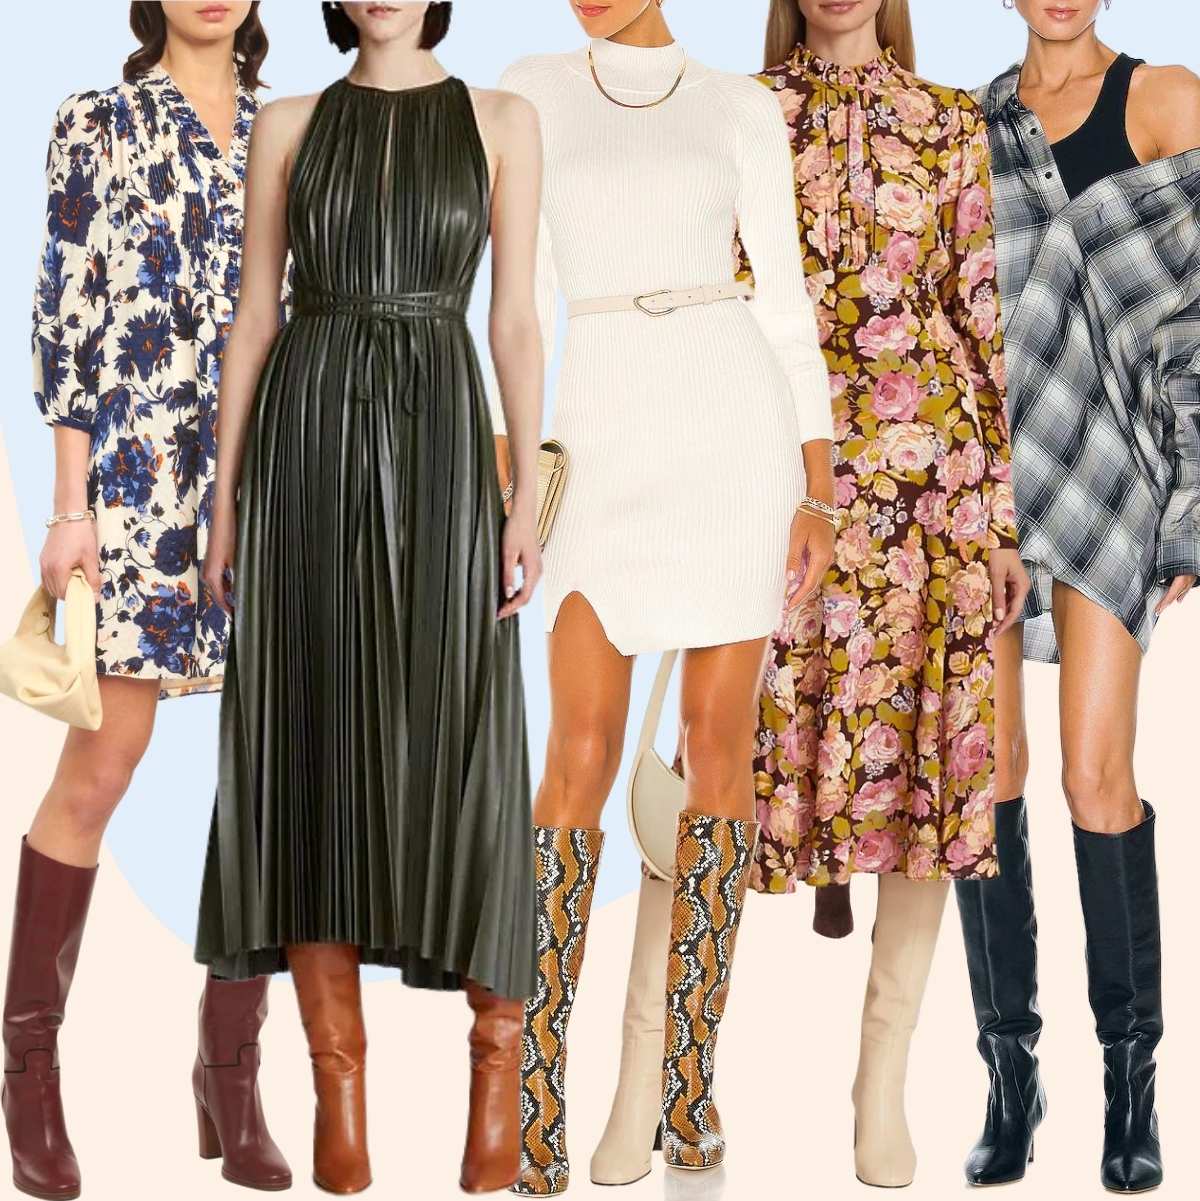 Collage of 5 women wearing different knee high boots with dresses.